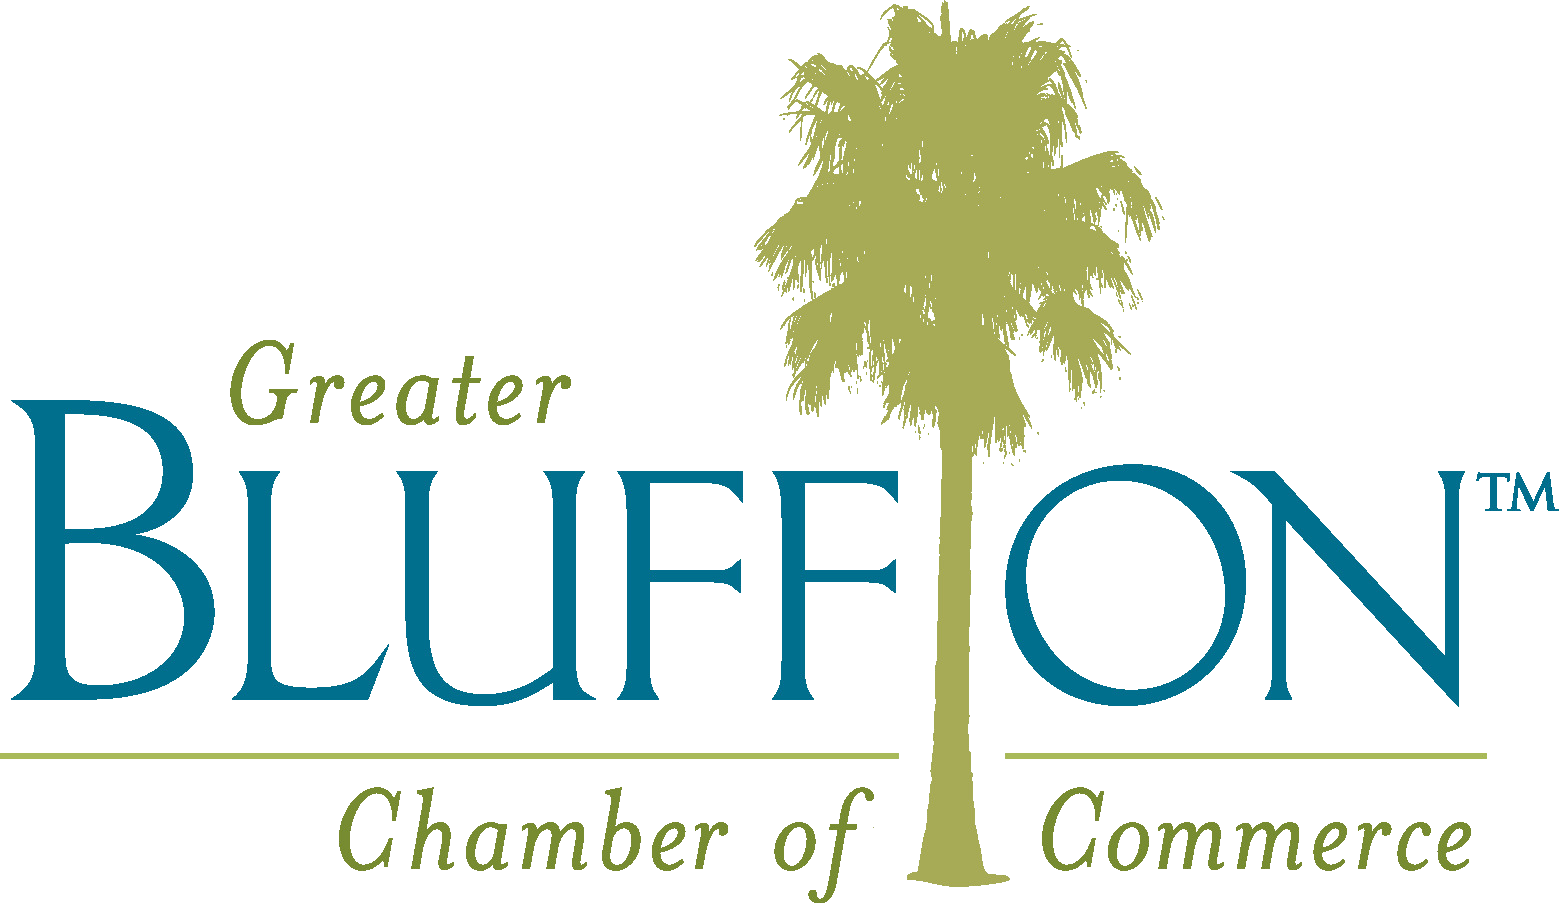 The Greater Bluffton Chamber of Commerce